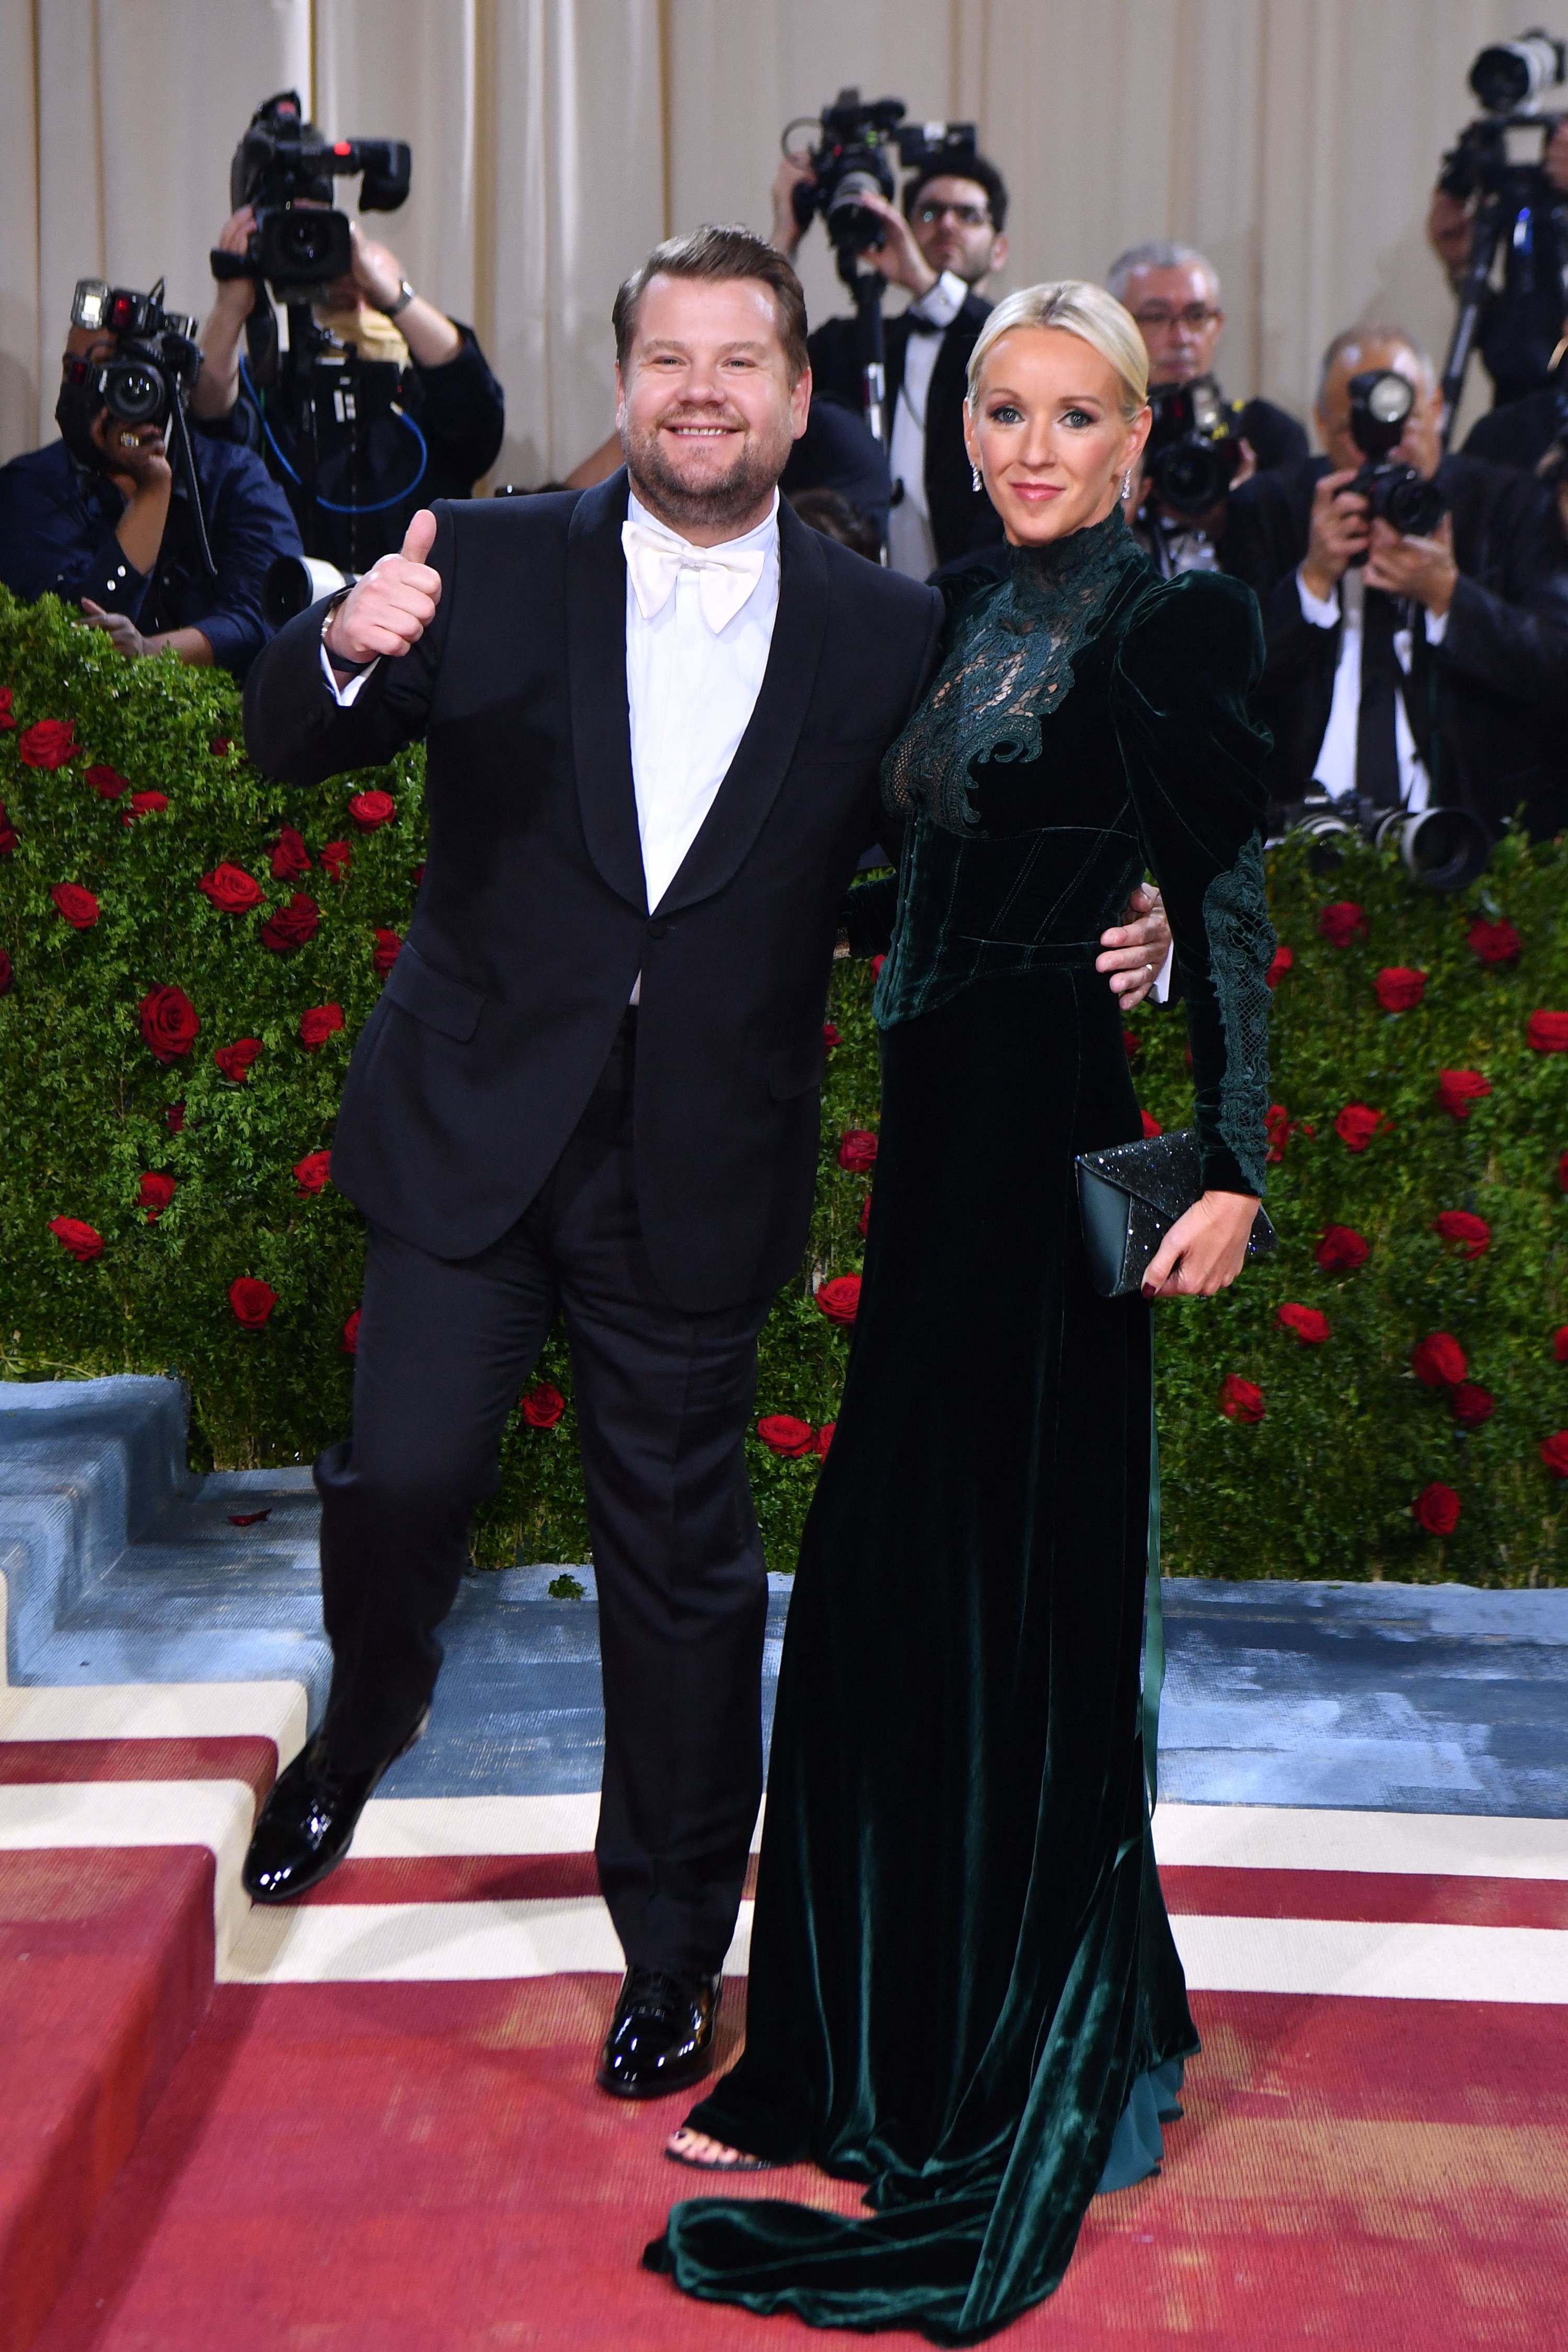 James giving a thumbs up as he and his wife walk the red carpet at an event